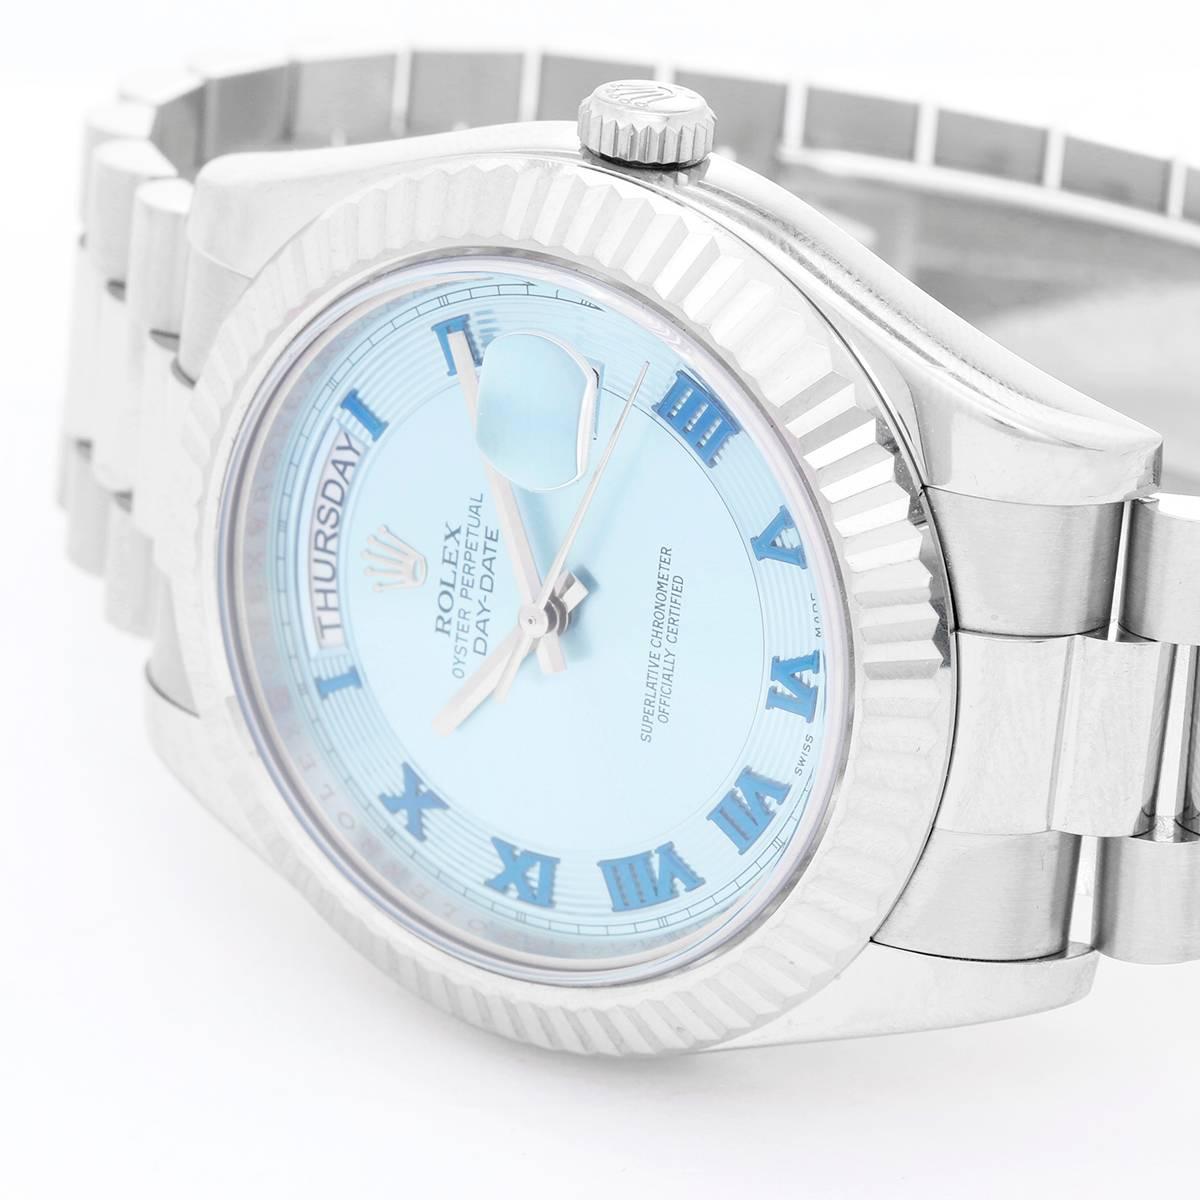 Rolex President Day-Date II Men's 18k White Gold Watch 218239 - Automatic winding, 31 jewels, Quickset, sapphire crystal. 18k white gold case with fluted bezel (41mm diameter). Glacier Blue dial with Roman numerals. This watch was upgraded with the